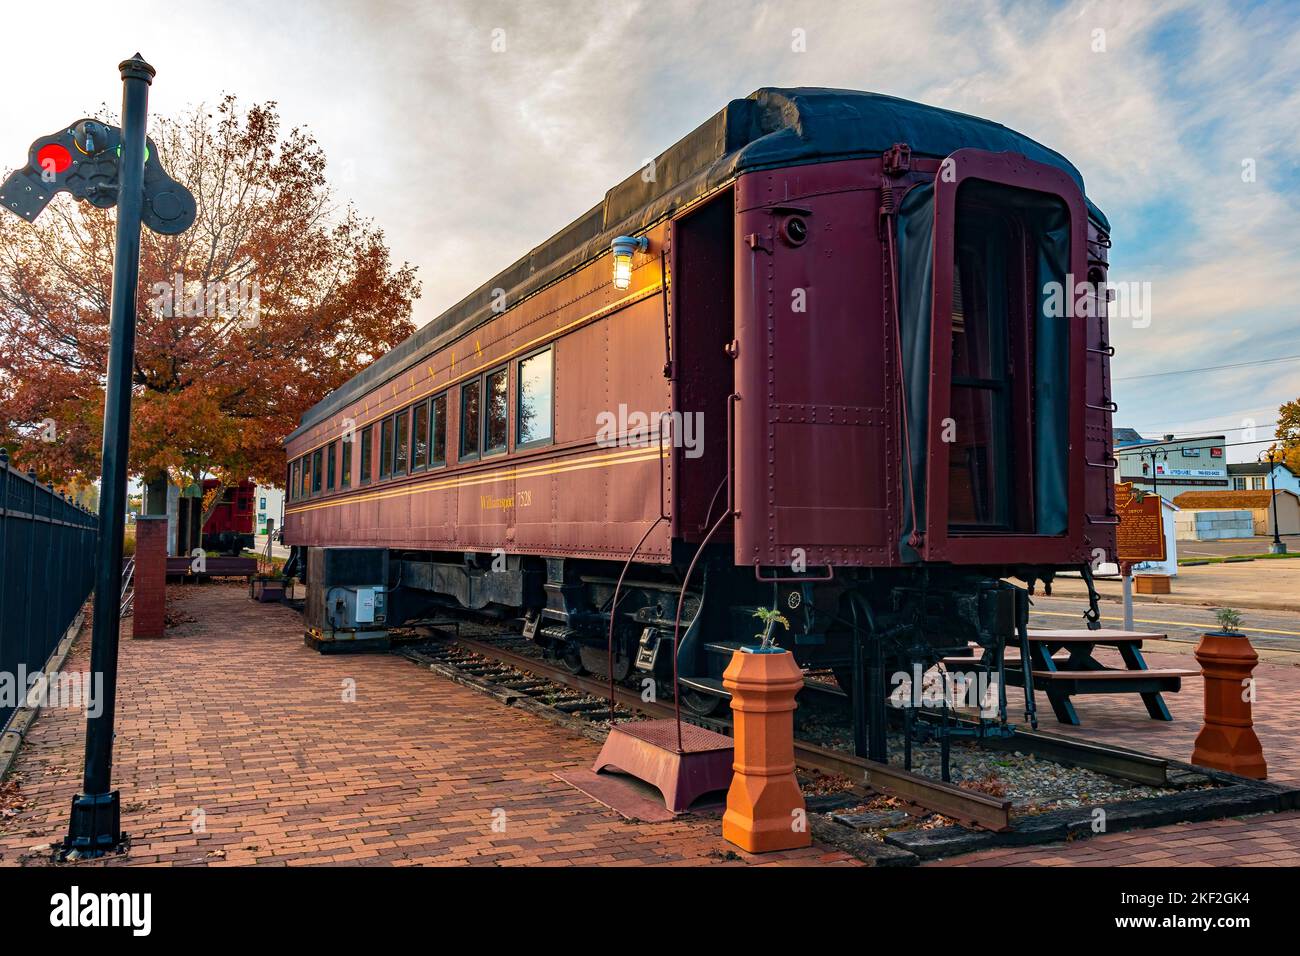 Dennison, Ohio, USA- Oct. 24, 2022: Display passenger railcar at the Dennison Railroad Depot and Museum. This depot  played a key role in transporting Stock Photo